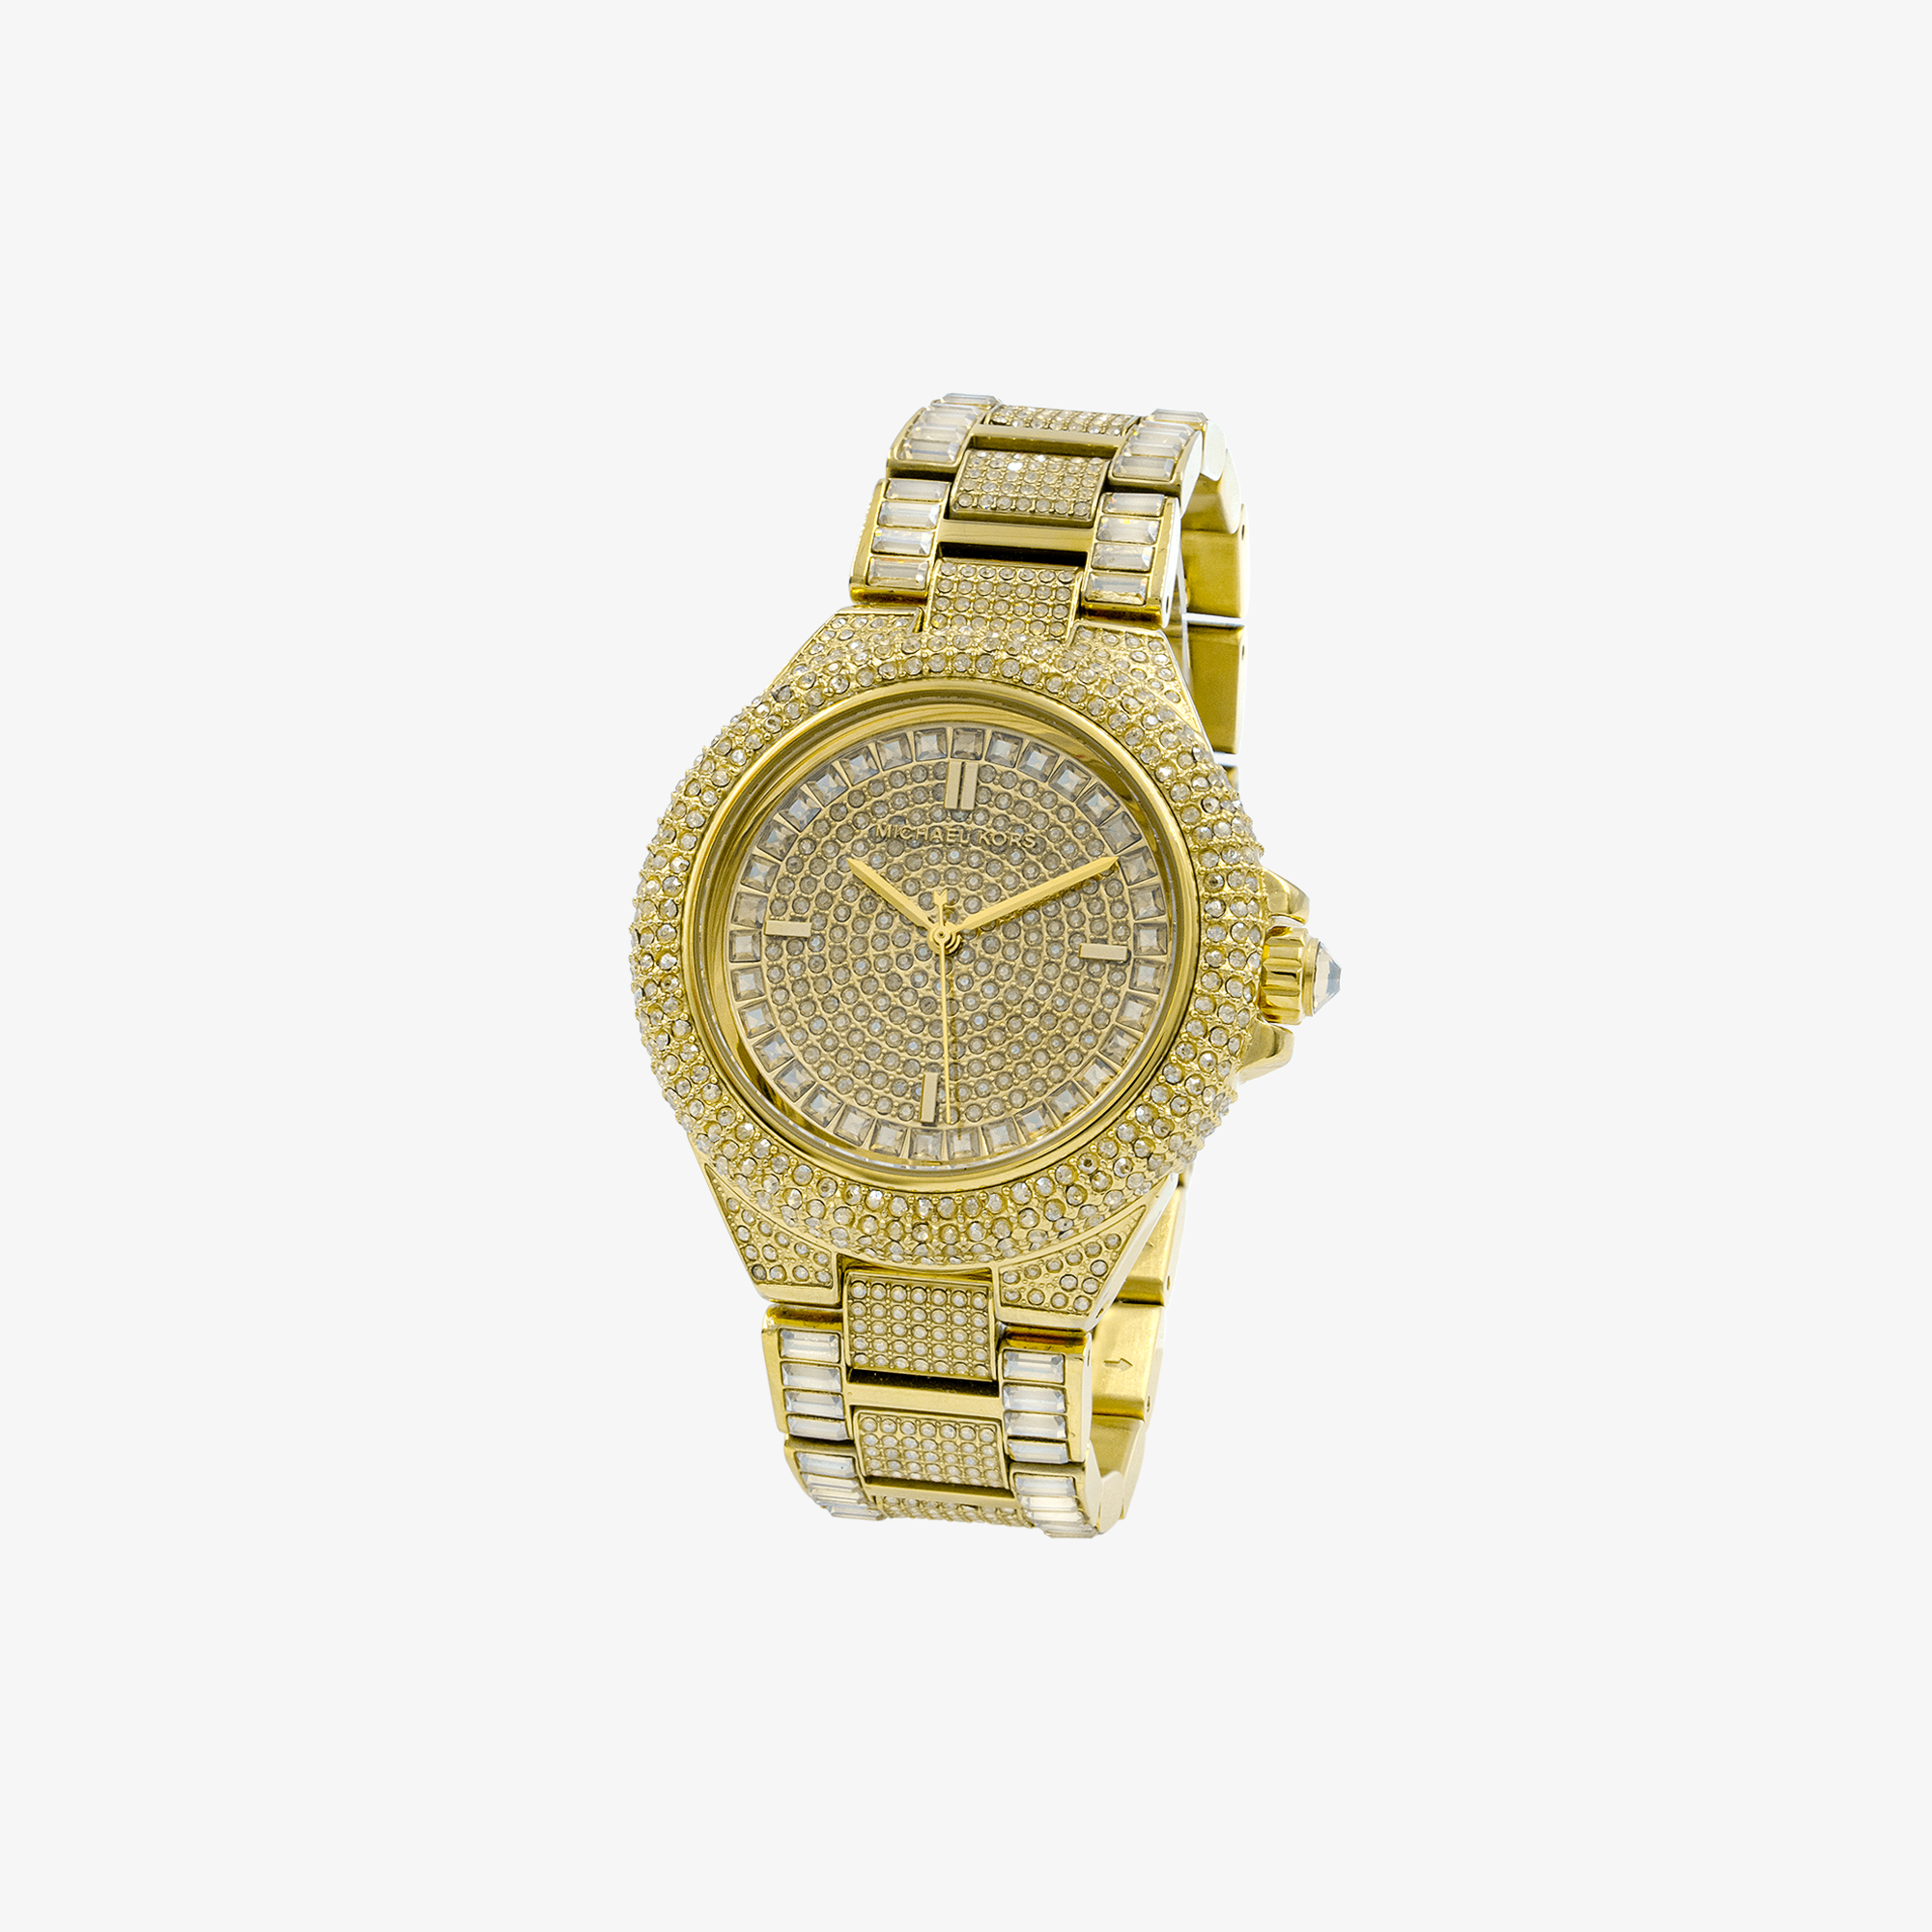 MICHAEL KORS CAMILLE GOLD TONE WATCH